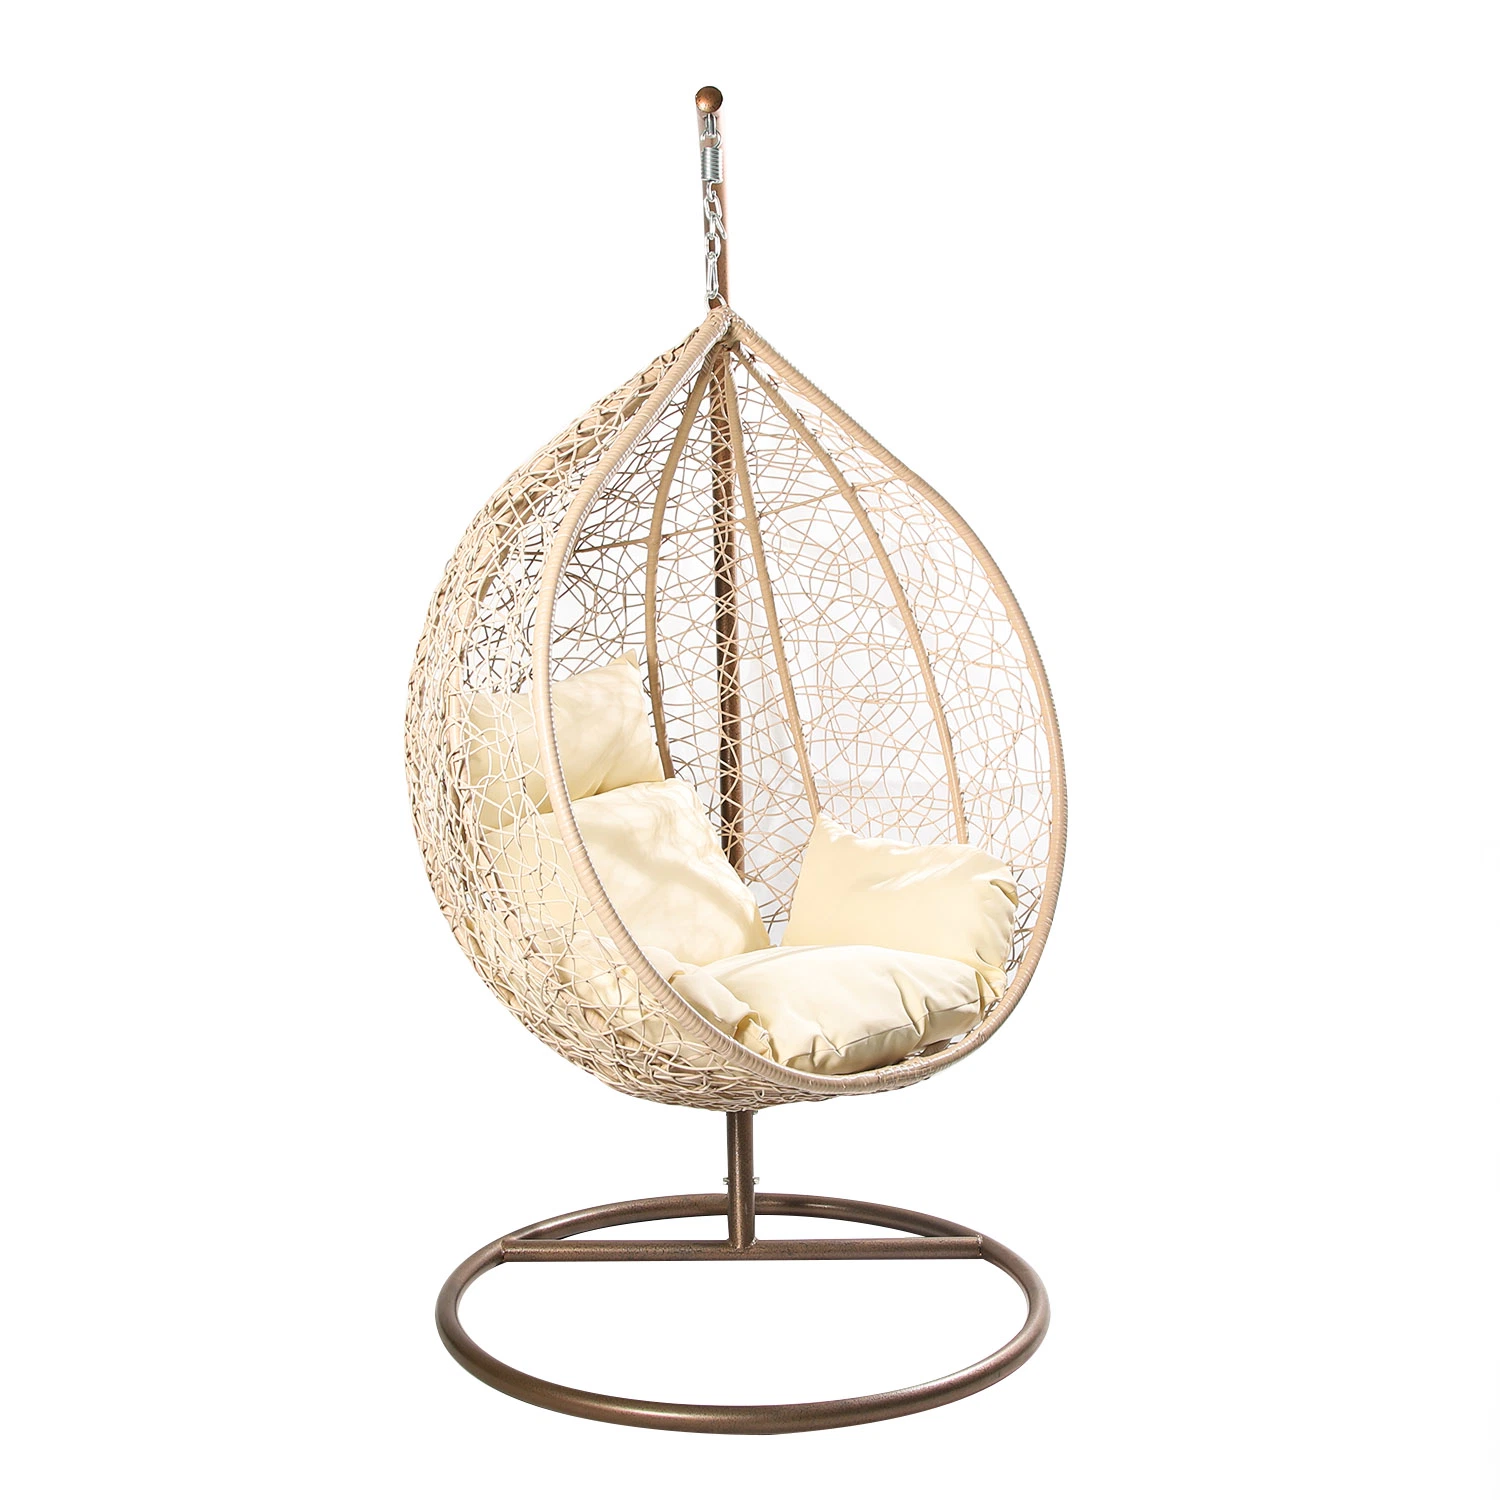 Nest Chair Swing Sitting Bird Cage Nest Big Large Nest Bedroom Egg Swing Chair with Stand